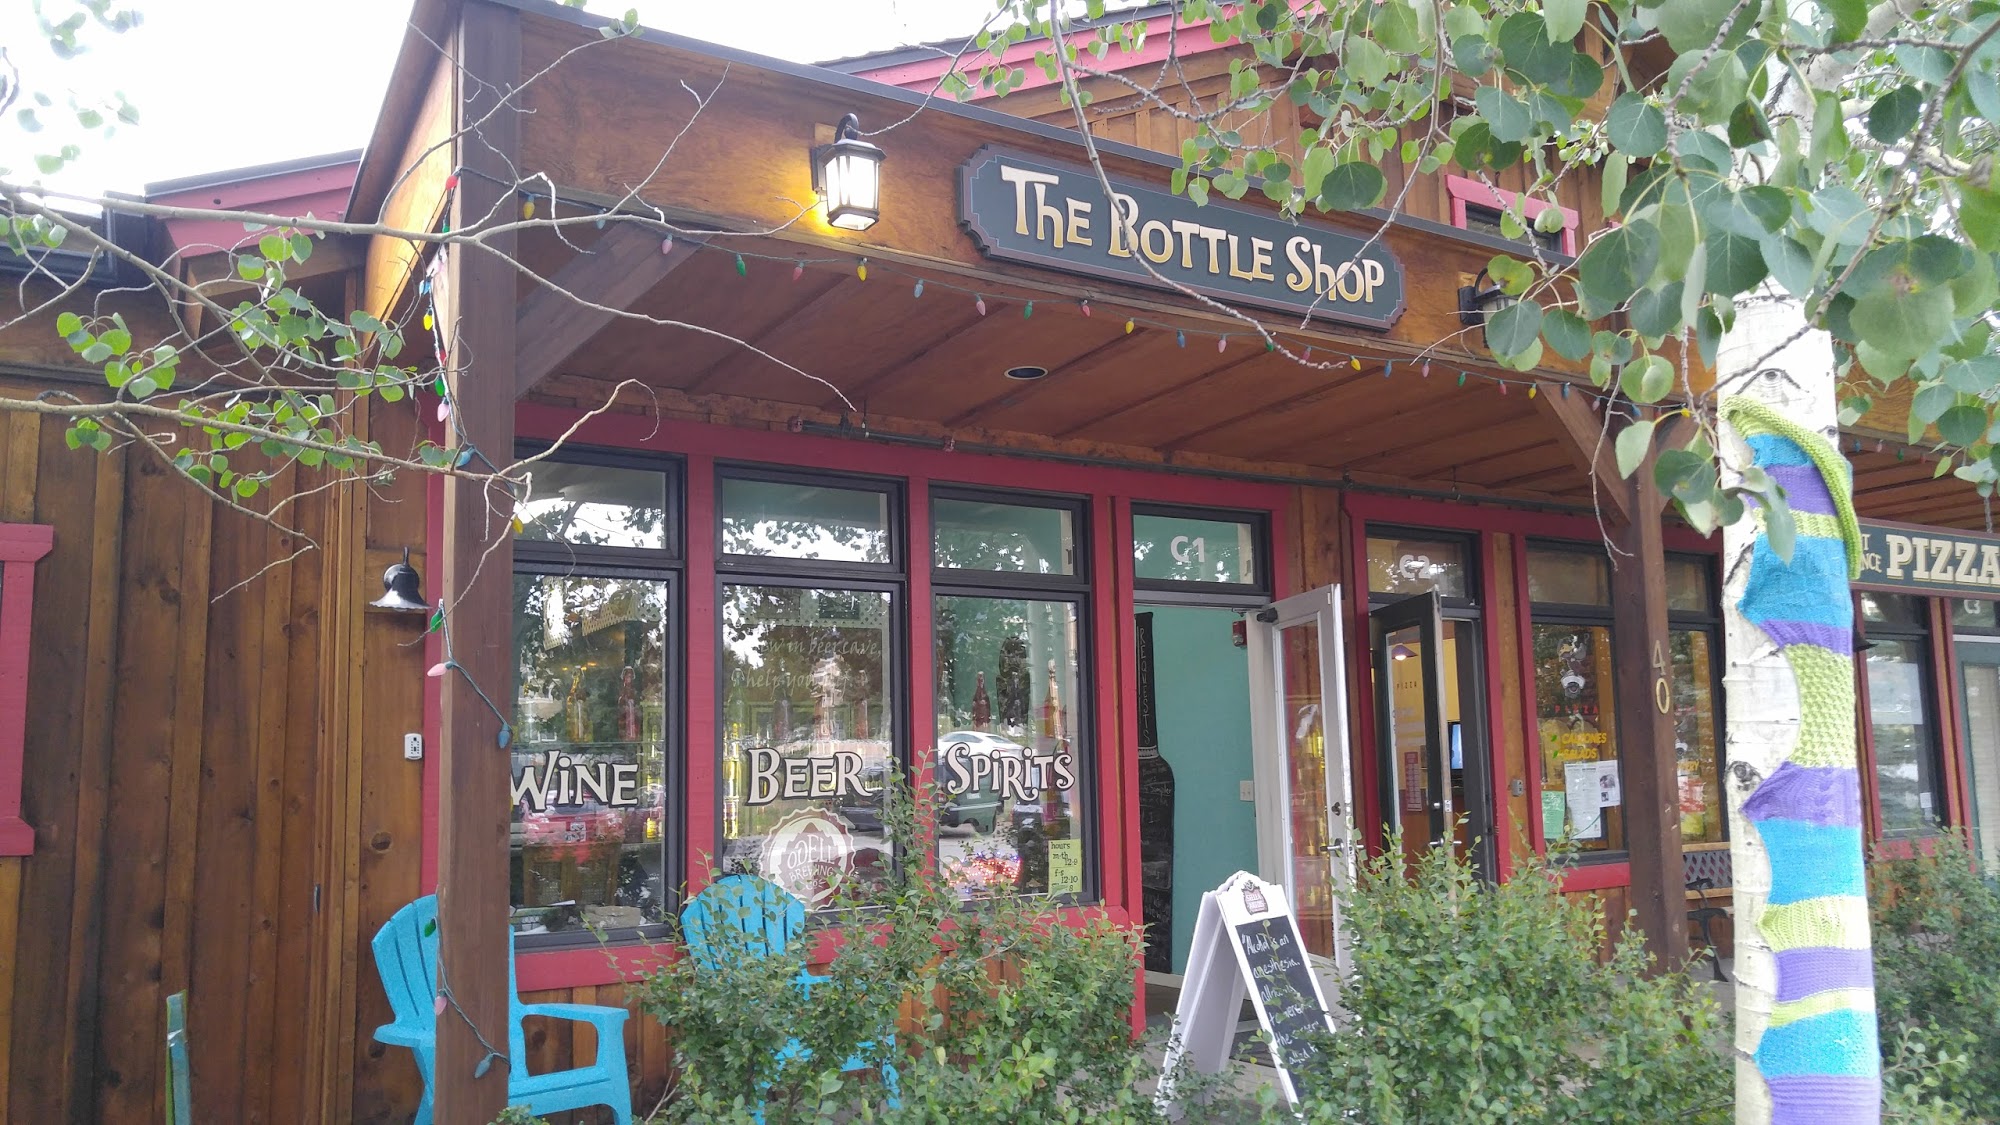 The Bottle Shop - Your Local Wine, Beer, and Spirits shop